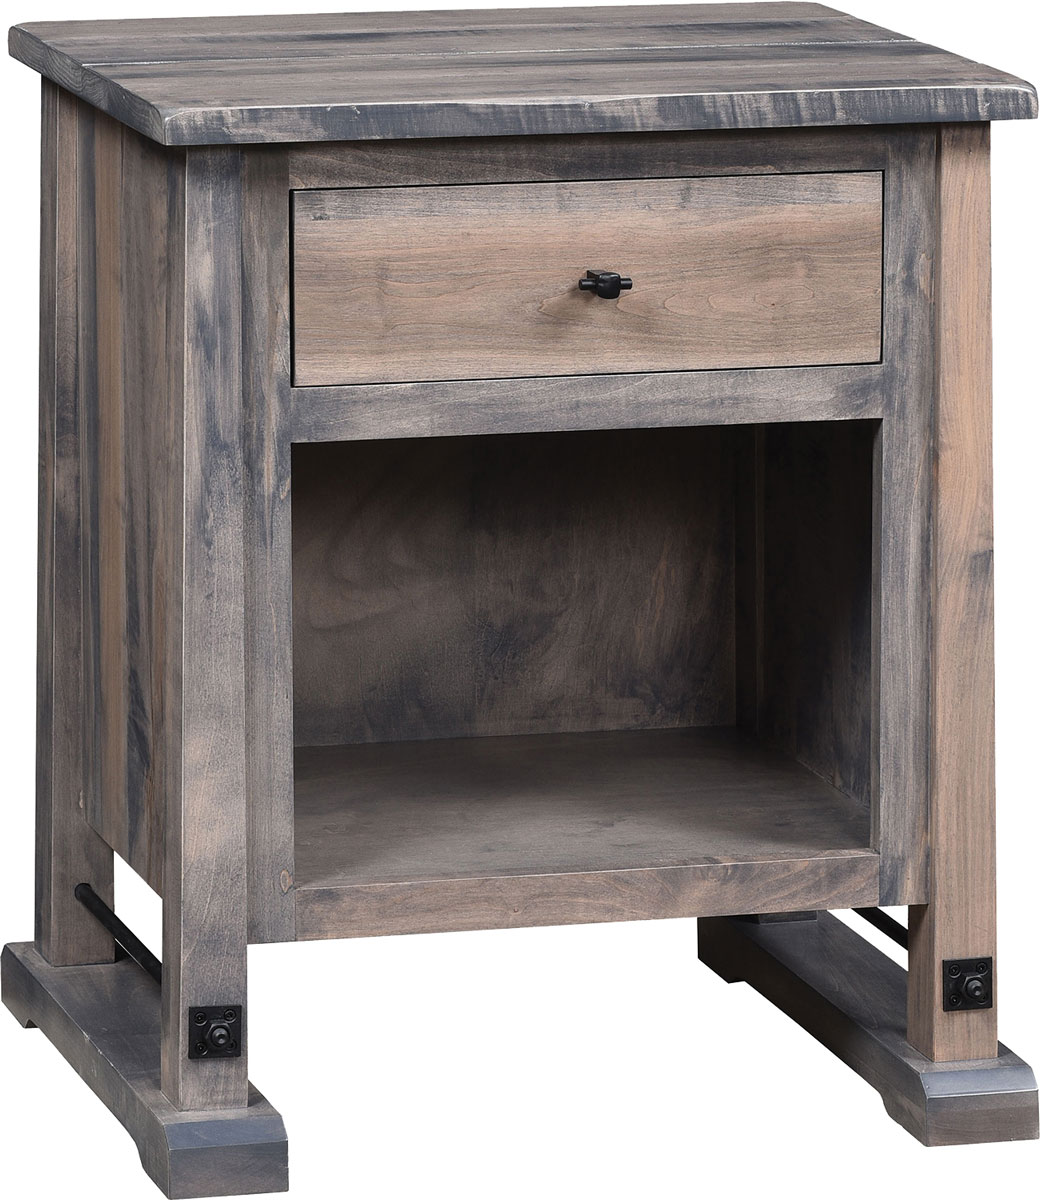 Carla Elizabeth 1 Drawer Nightstand  shown in Brown Maple with S40788 finish.